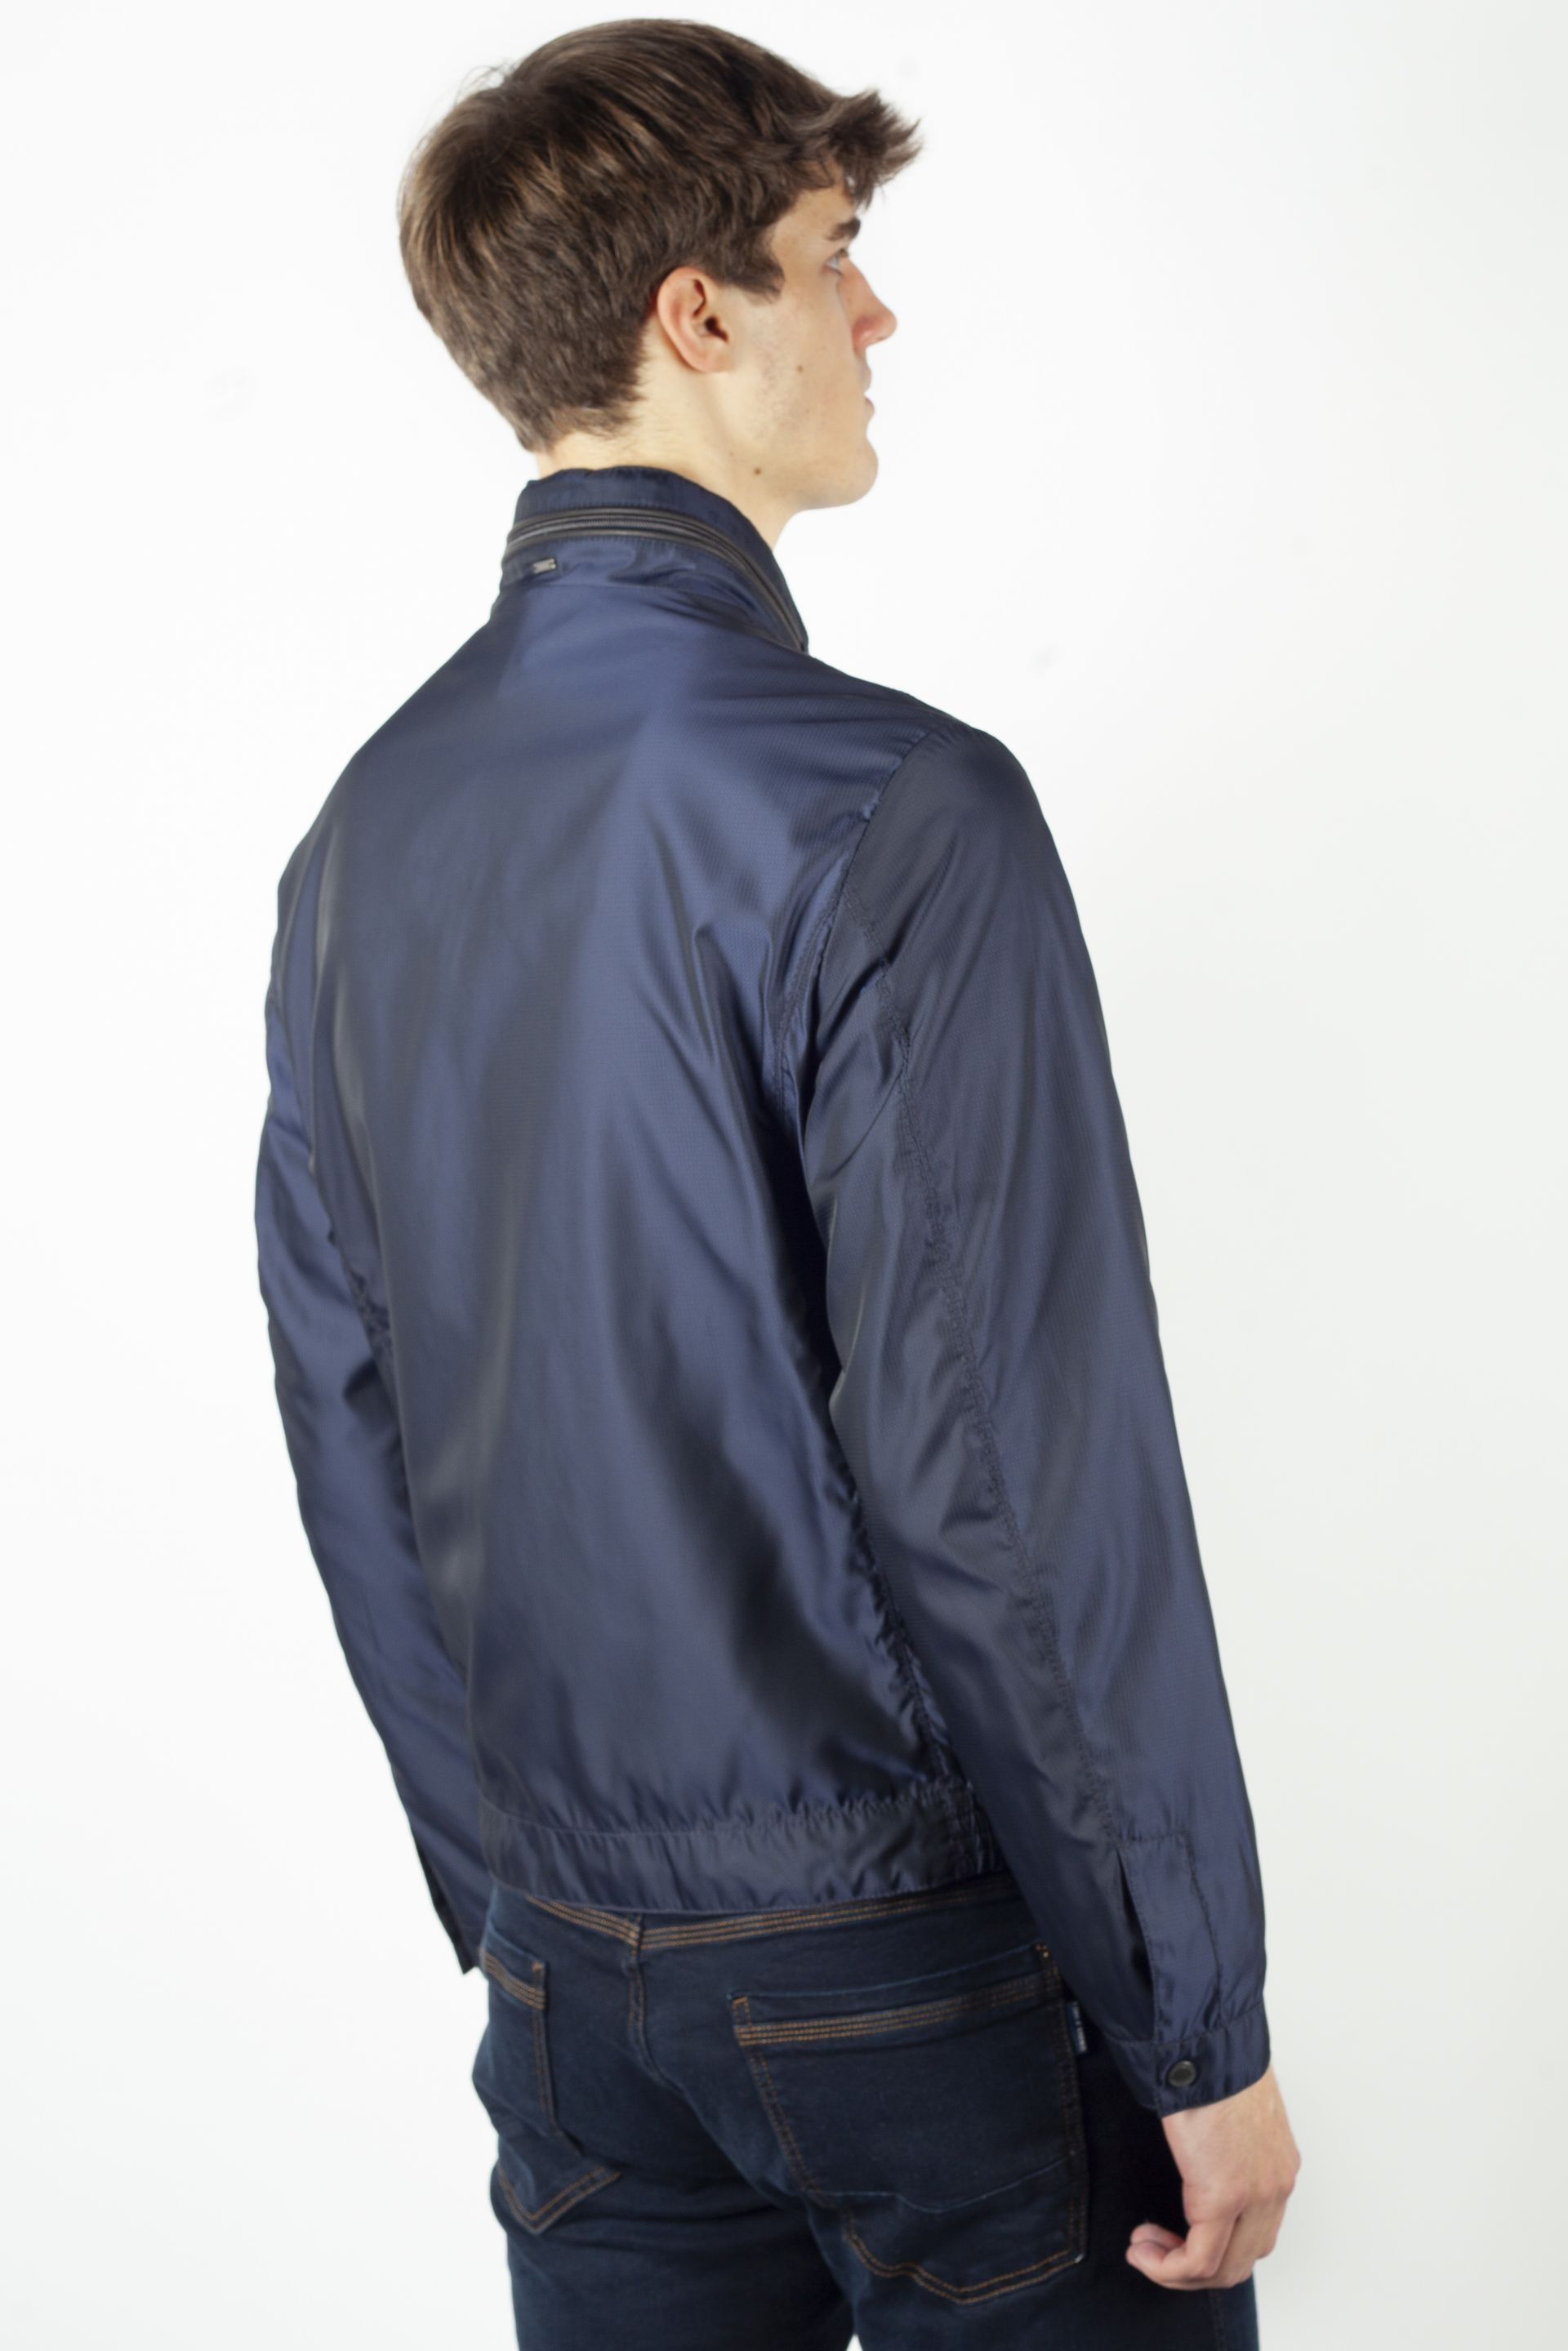 Wind jacket STATE OF ART 781-18452-5900